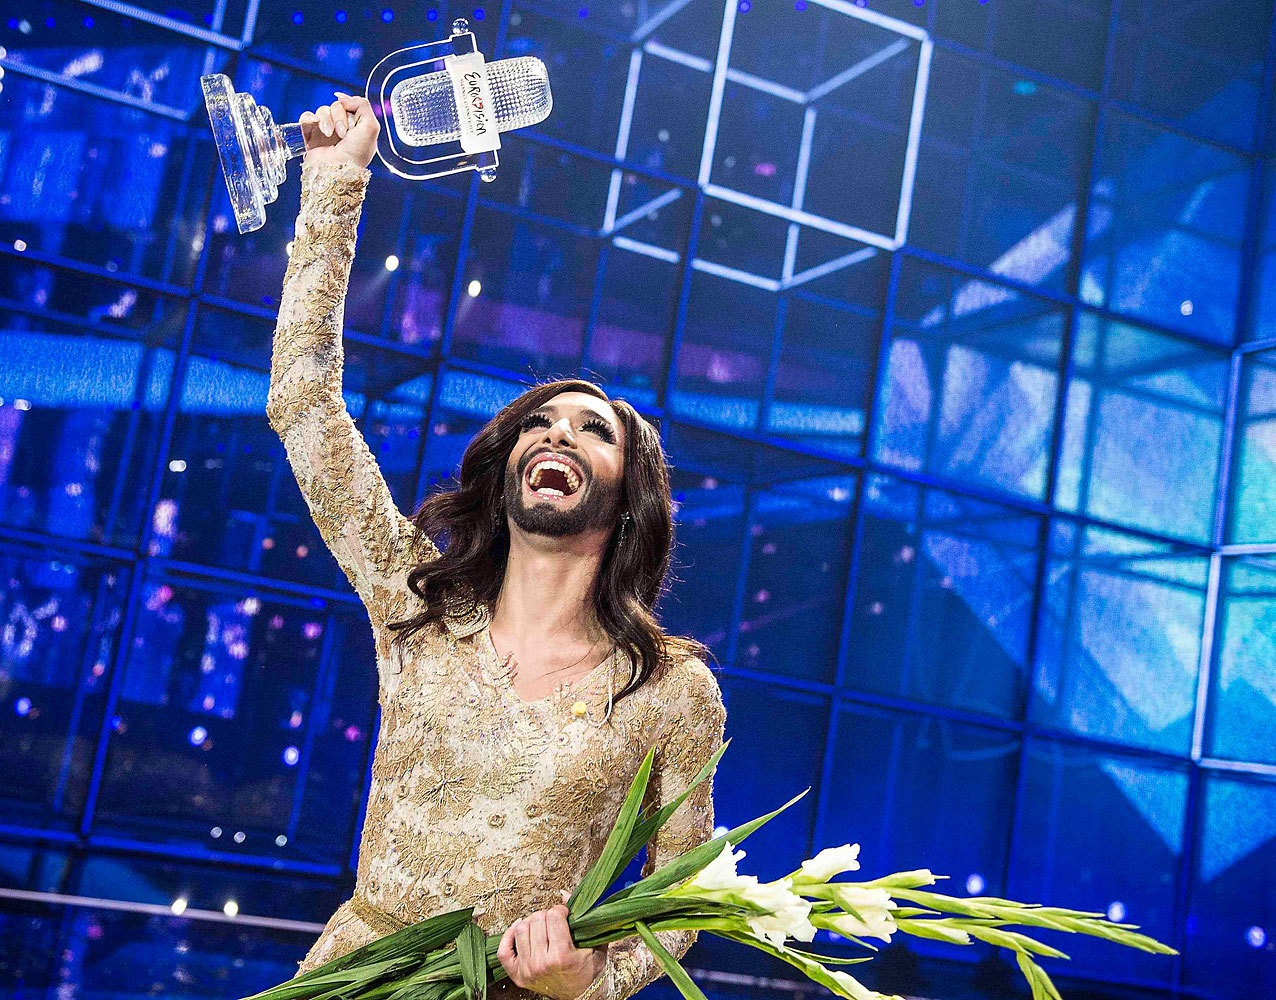 Conchita Wurst representing Austria celebrates with the trophy after winning the 59th annual Eurovision Song Contest (ESC) at the BW Hallerne in Copenhagen, in this May 10, 2014 picture provided by Scanpix Denmark. (Scanpix Denmark/Reuters)